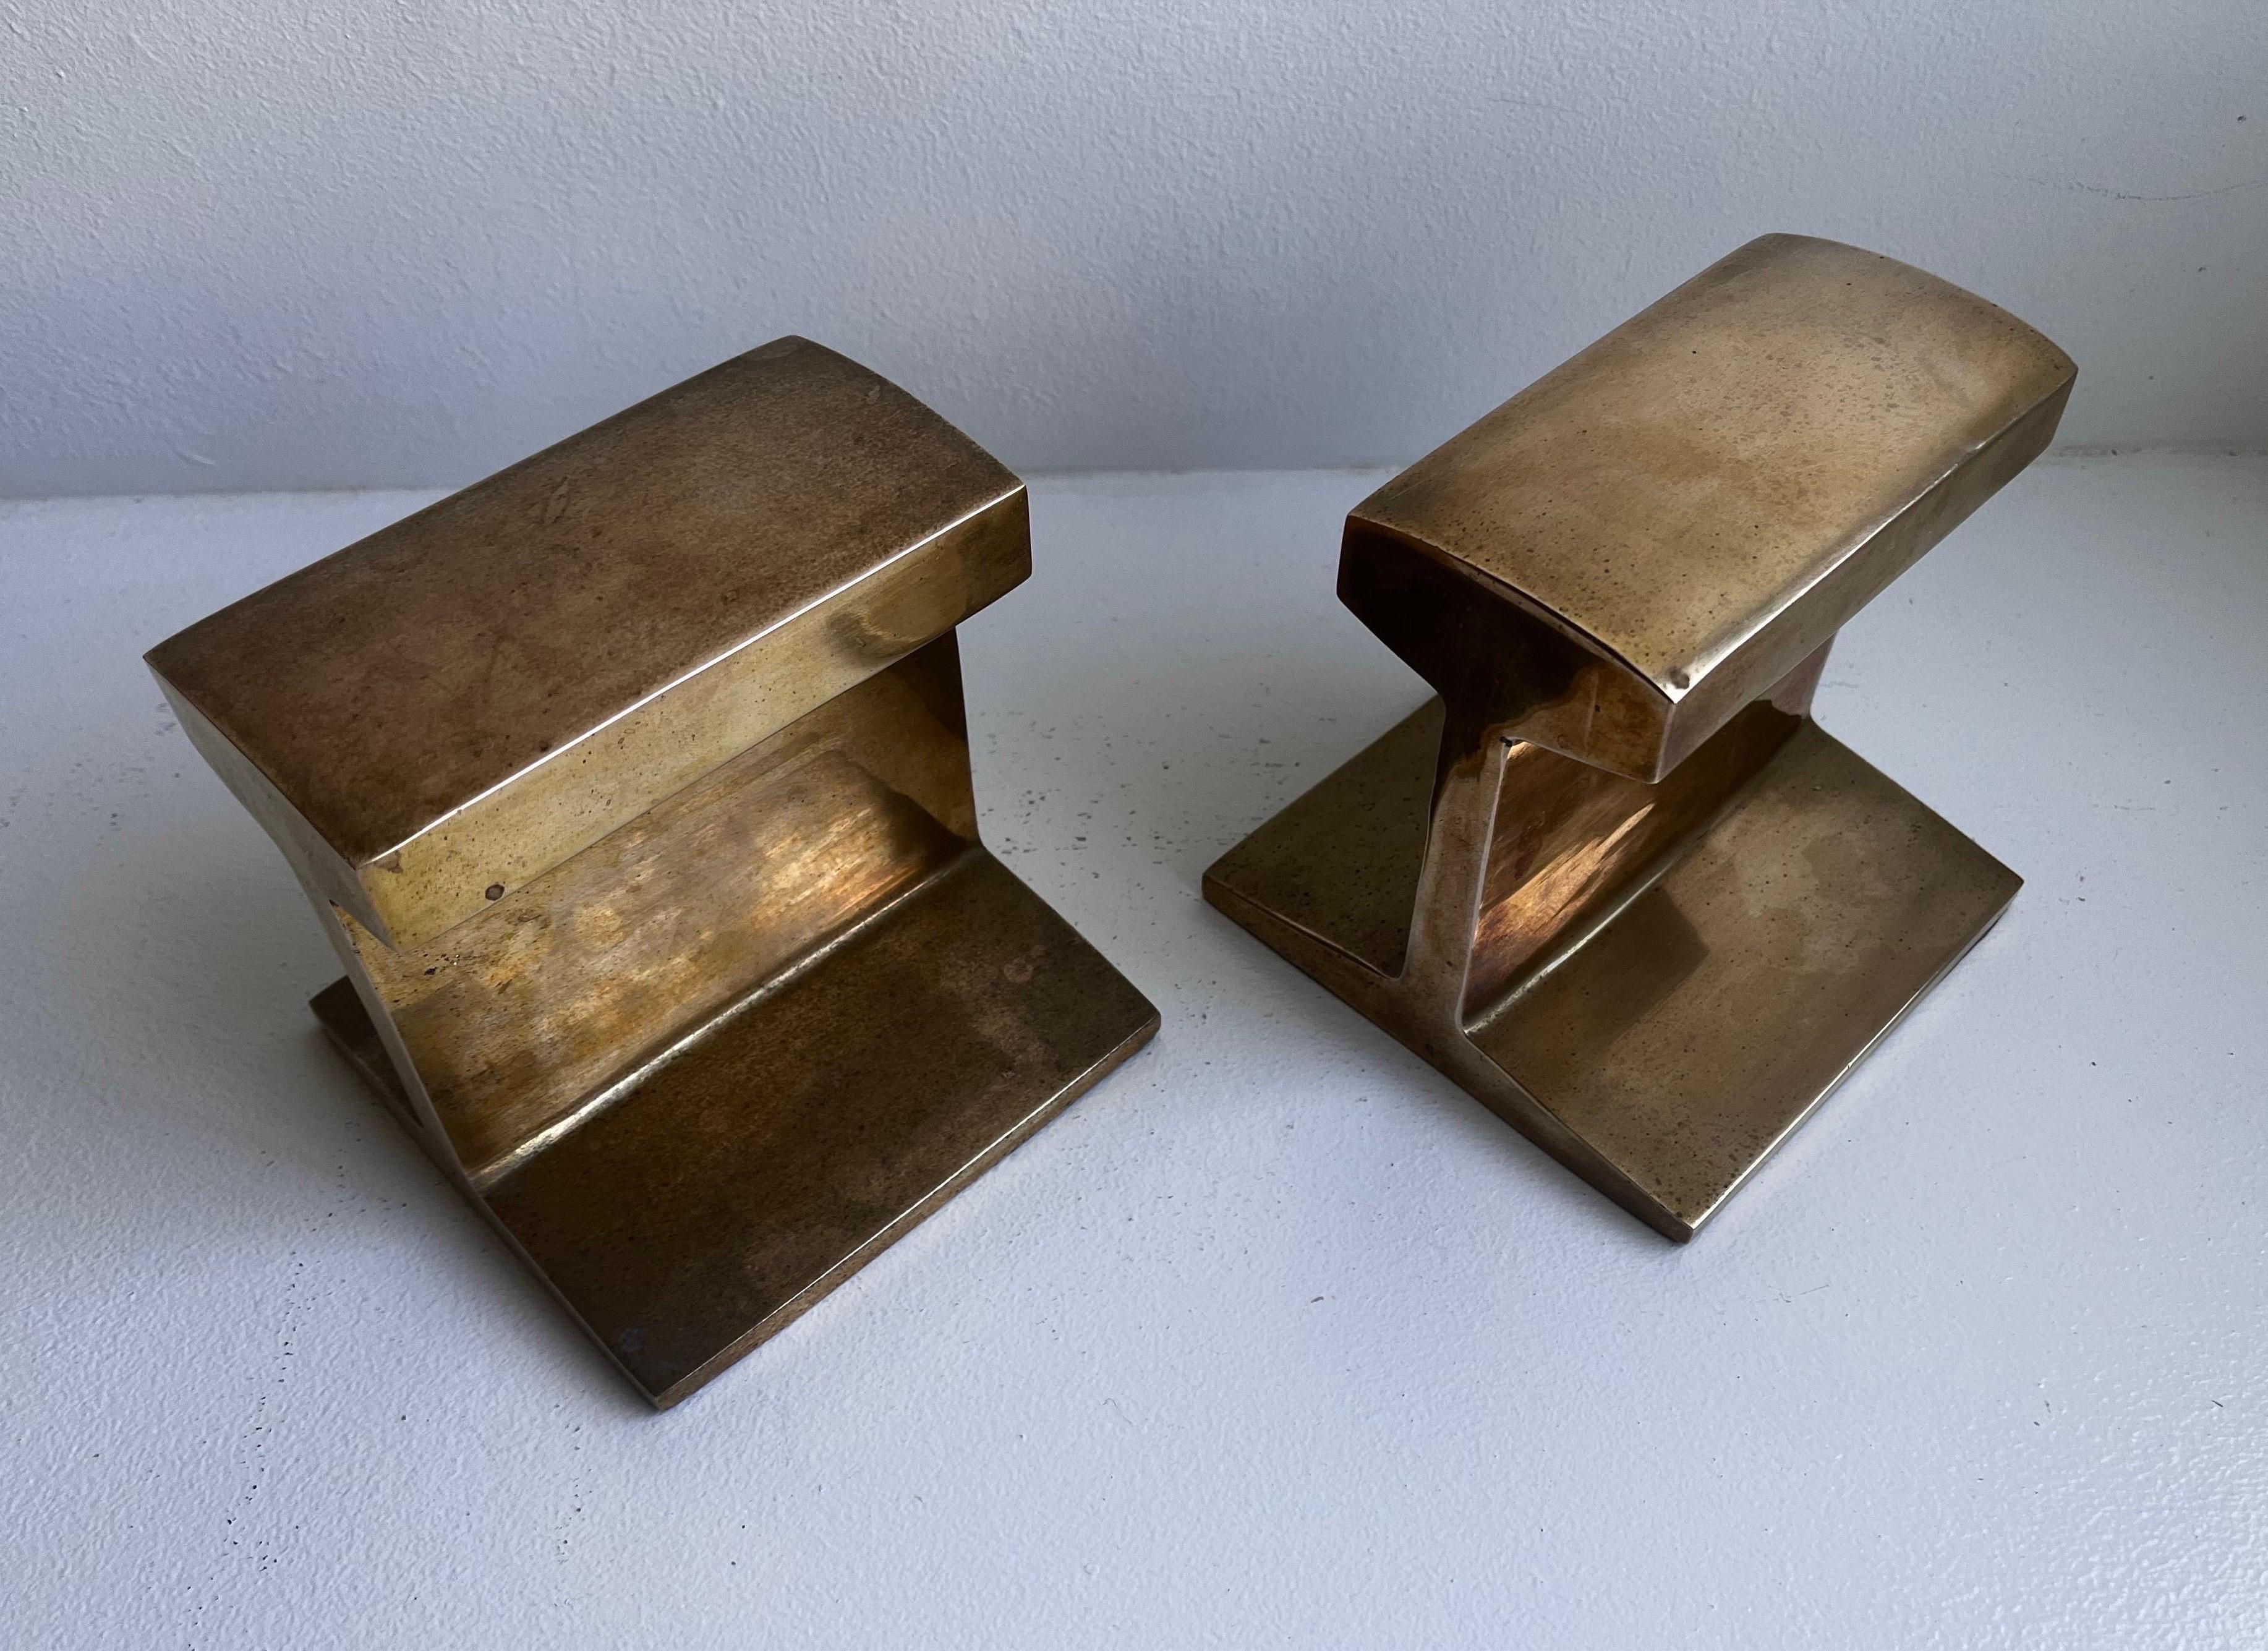 Cast I-Beam Bookends 
in the Style of Ben Seibel

Bohemian / midcentury / Brutalist - circa 1970s

Shape is cast brass with original felt on the bottom
Great patina with some discoloration.